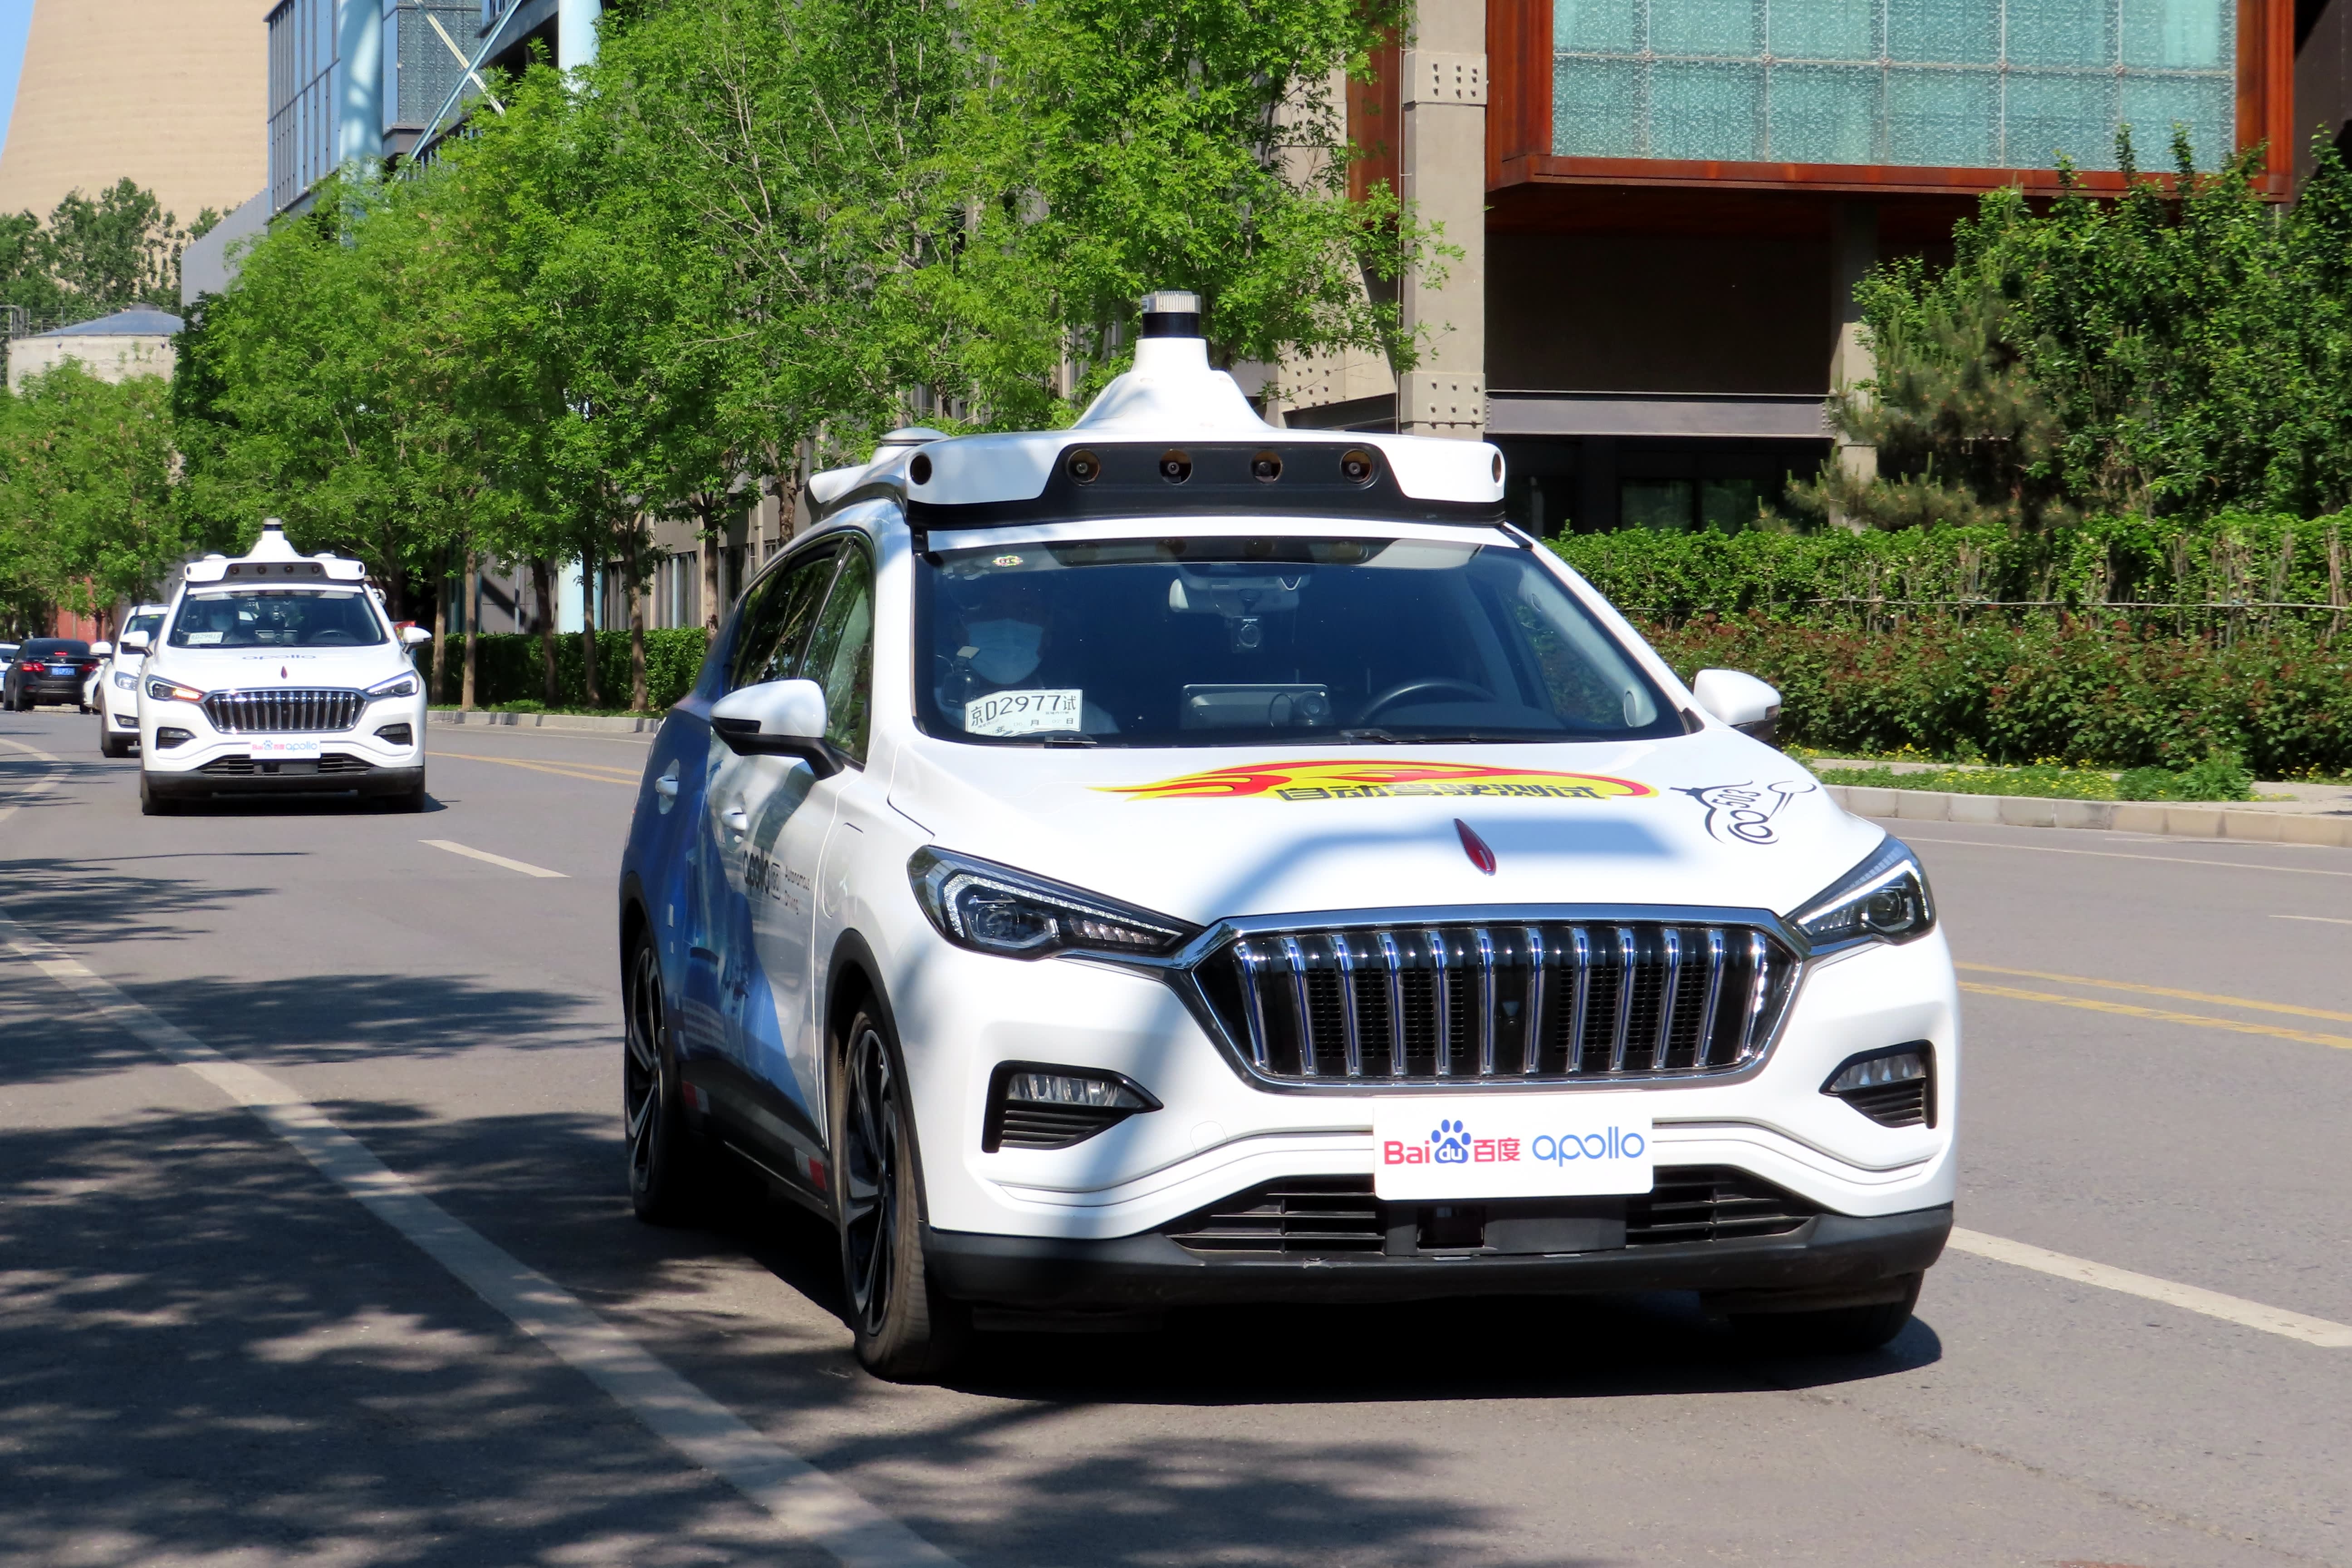 Baidu pushes to put driverless taxis on China roads with BAIC tie-up